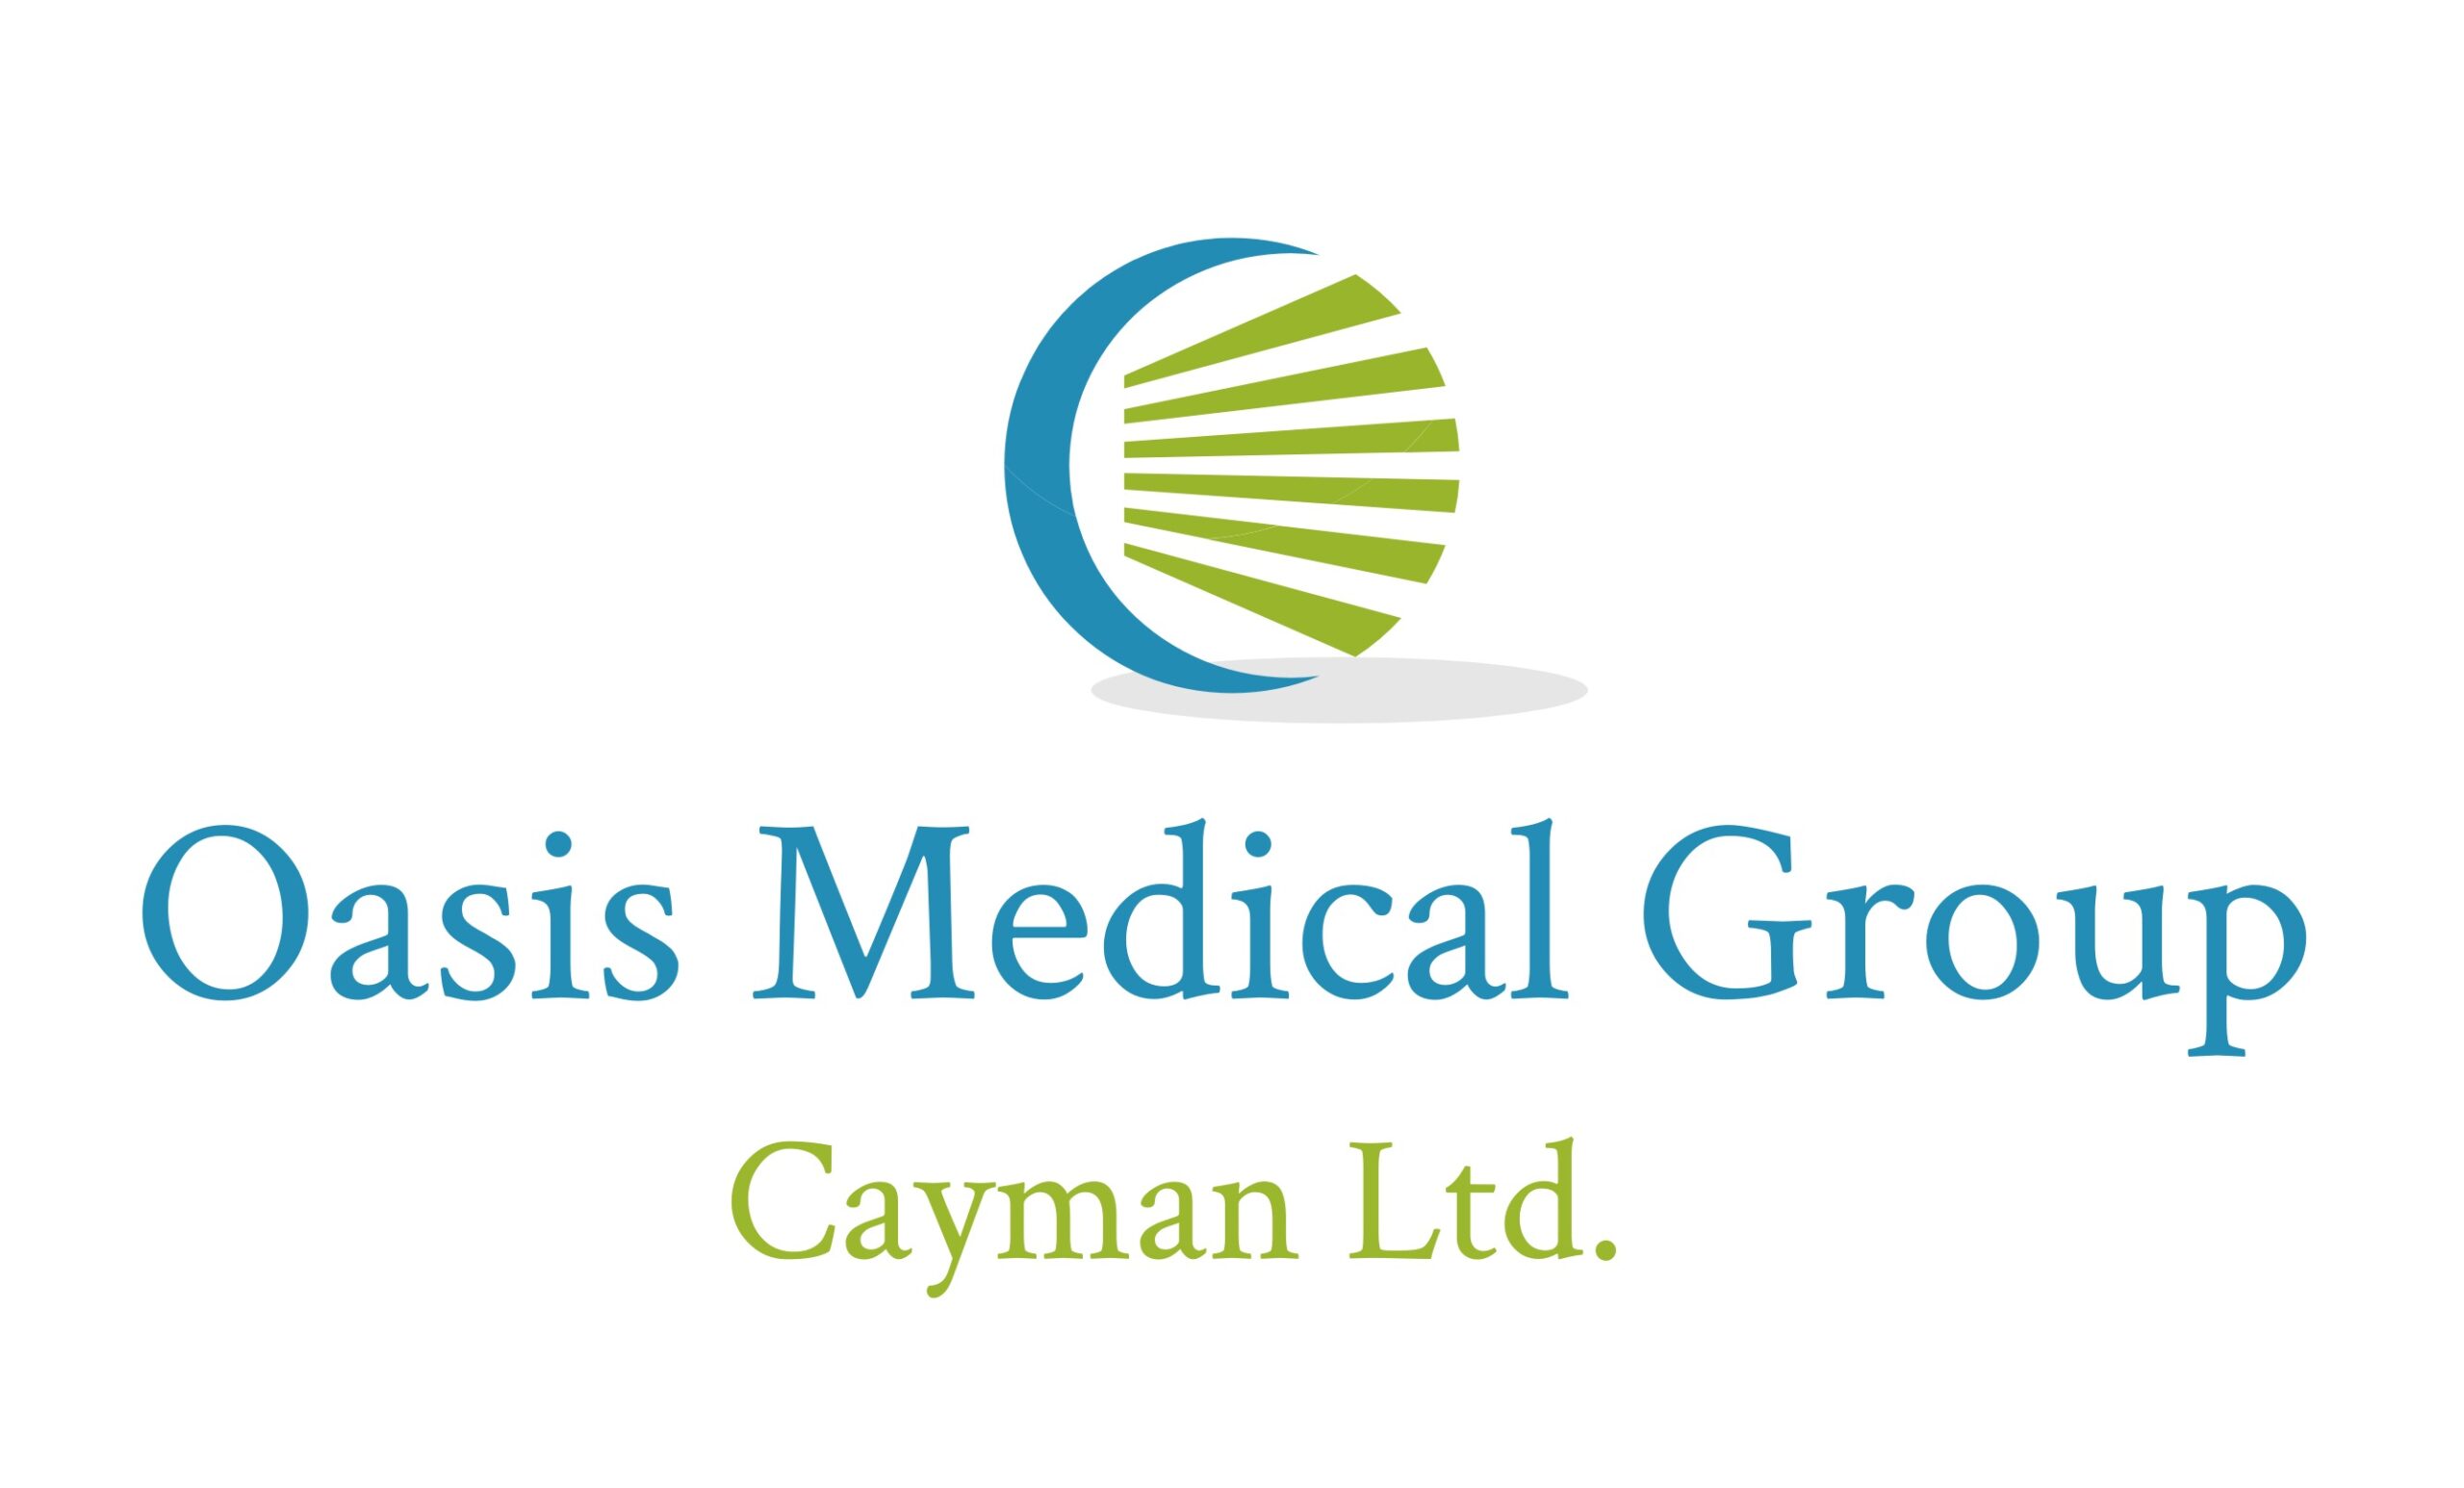 Oasis Medical Group|Contact